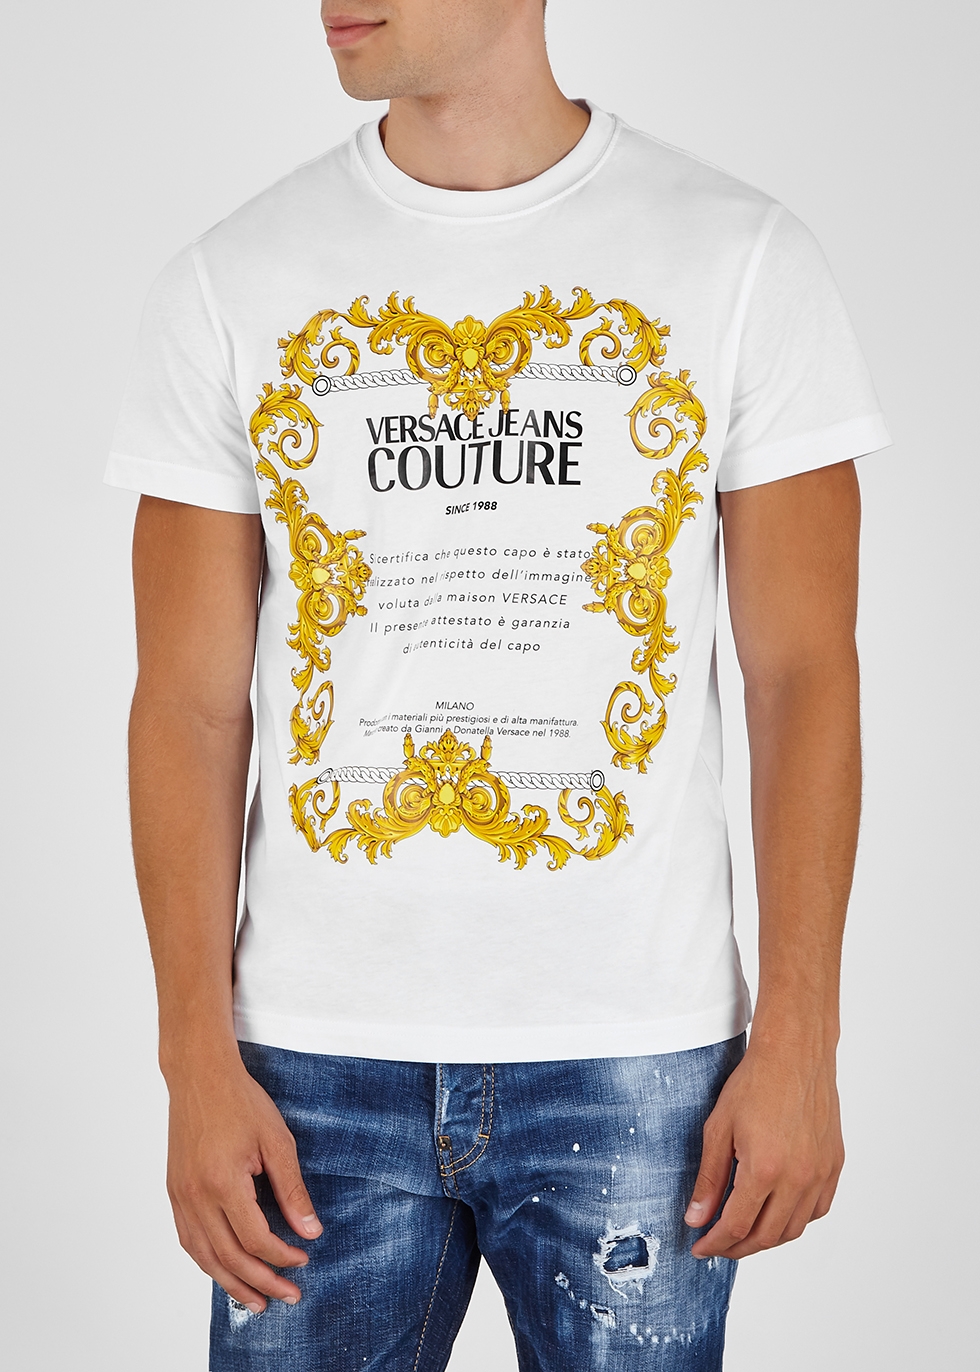 couture t shirt